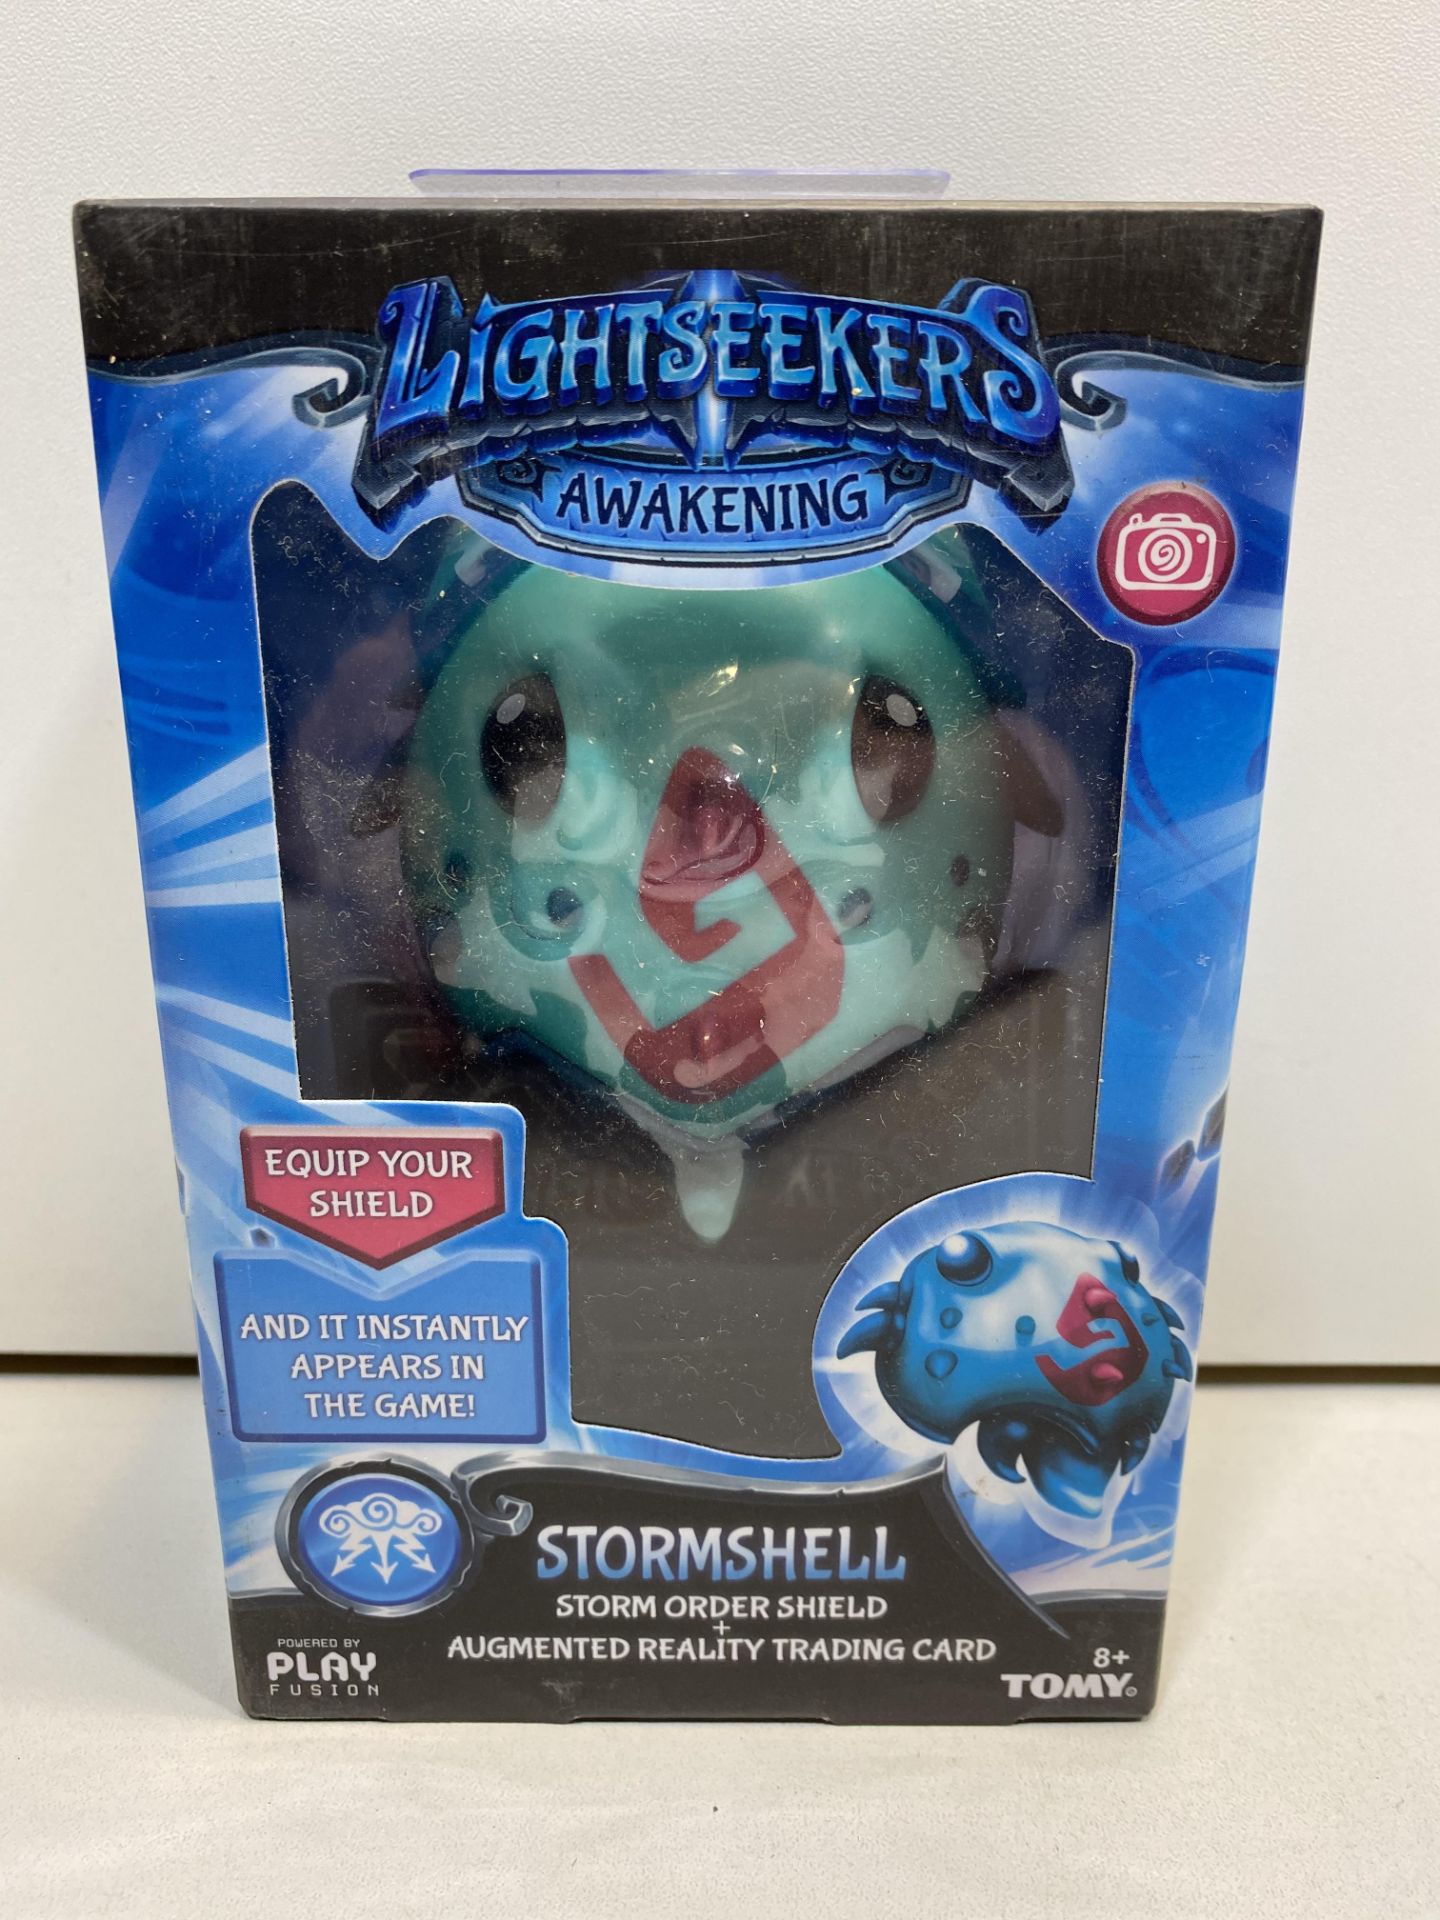 25 x Lightseekers L71215 Stormshell Shield Playset |796714712154 - Image 4 of 5